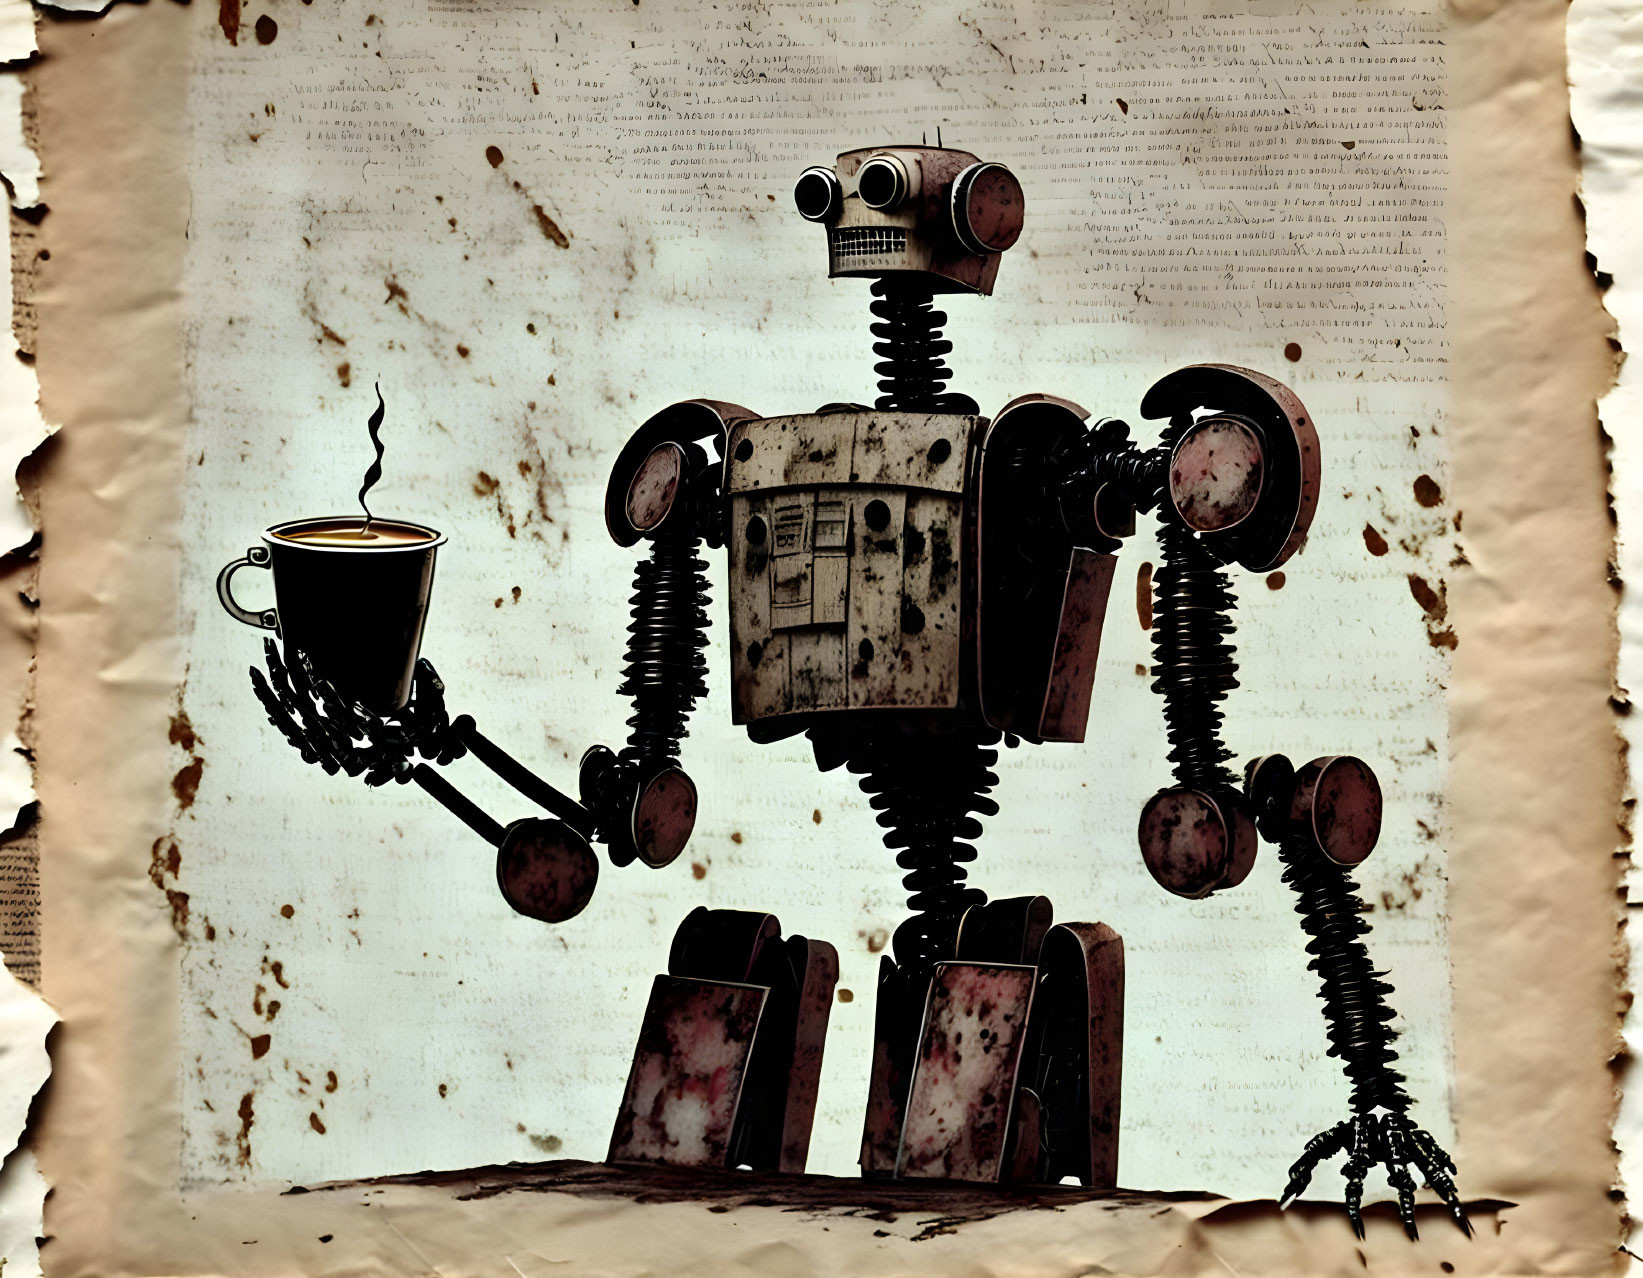 Vintage Robot Illustration with Coffee Cup on Aged Paper Background